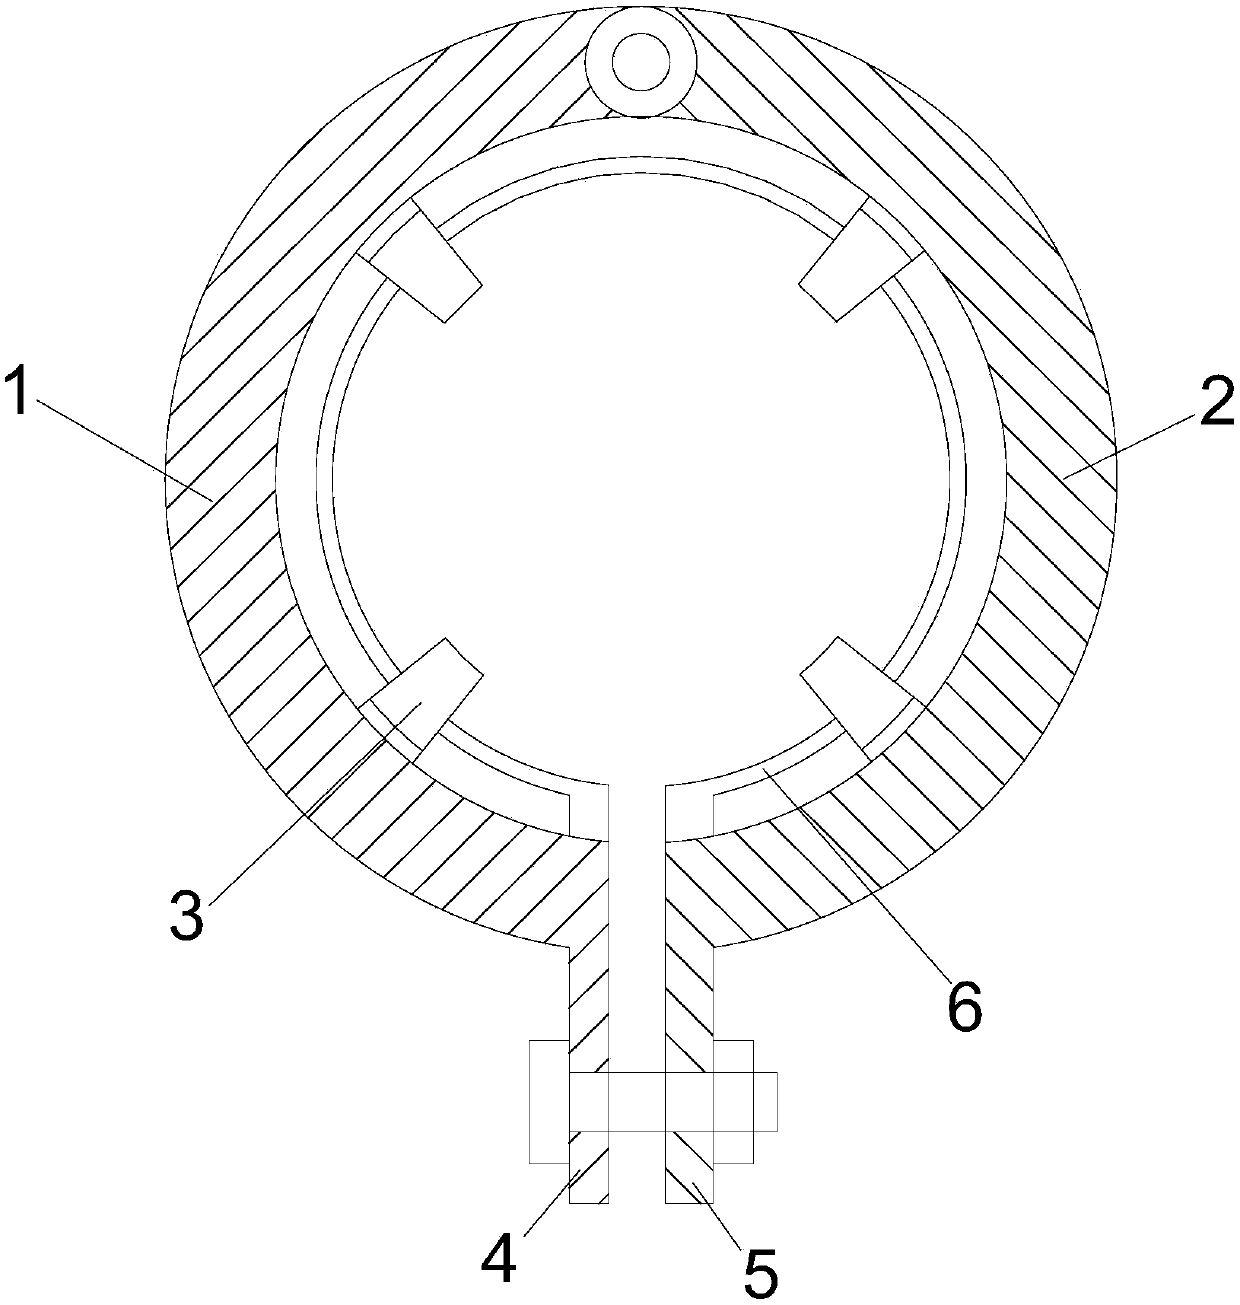 A self-locking ring buckle for scaffolding